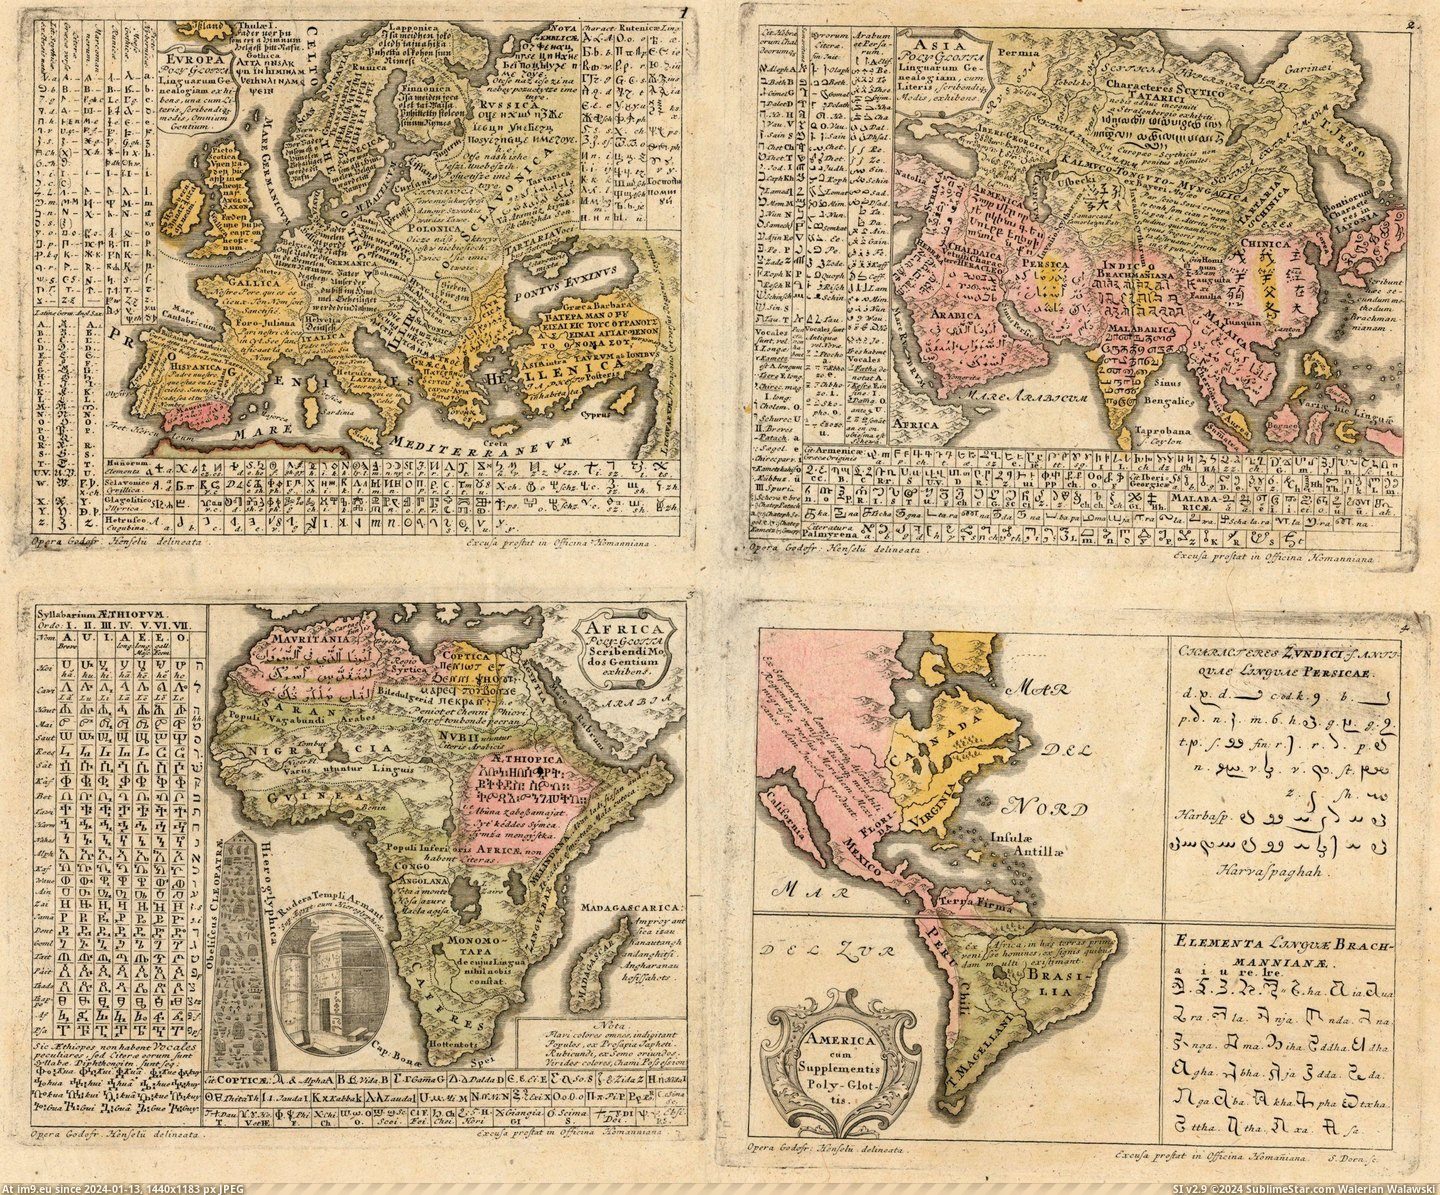 #World #Languages #Systems #Writing [Mapporn] Languages and writing systems of the world (1741) [2547x2104] Pic. (Image of album My r/MAPS favs))